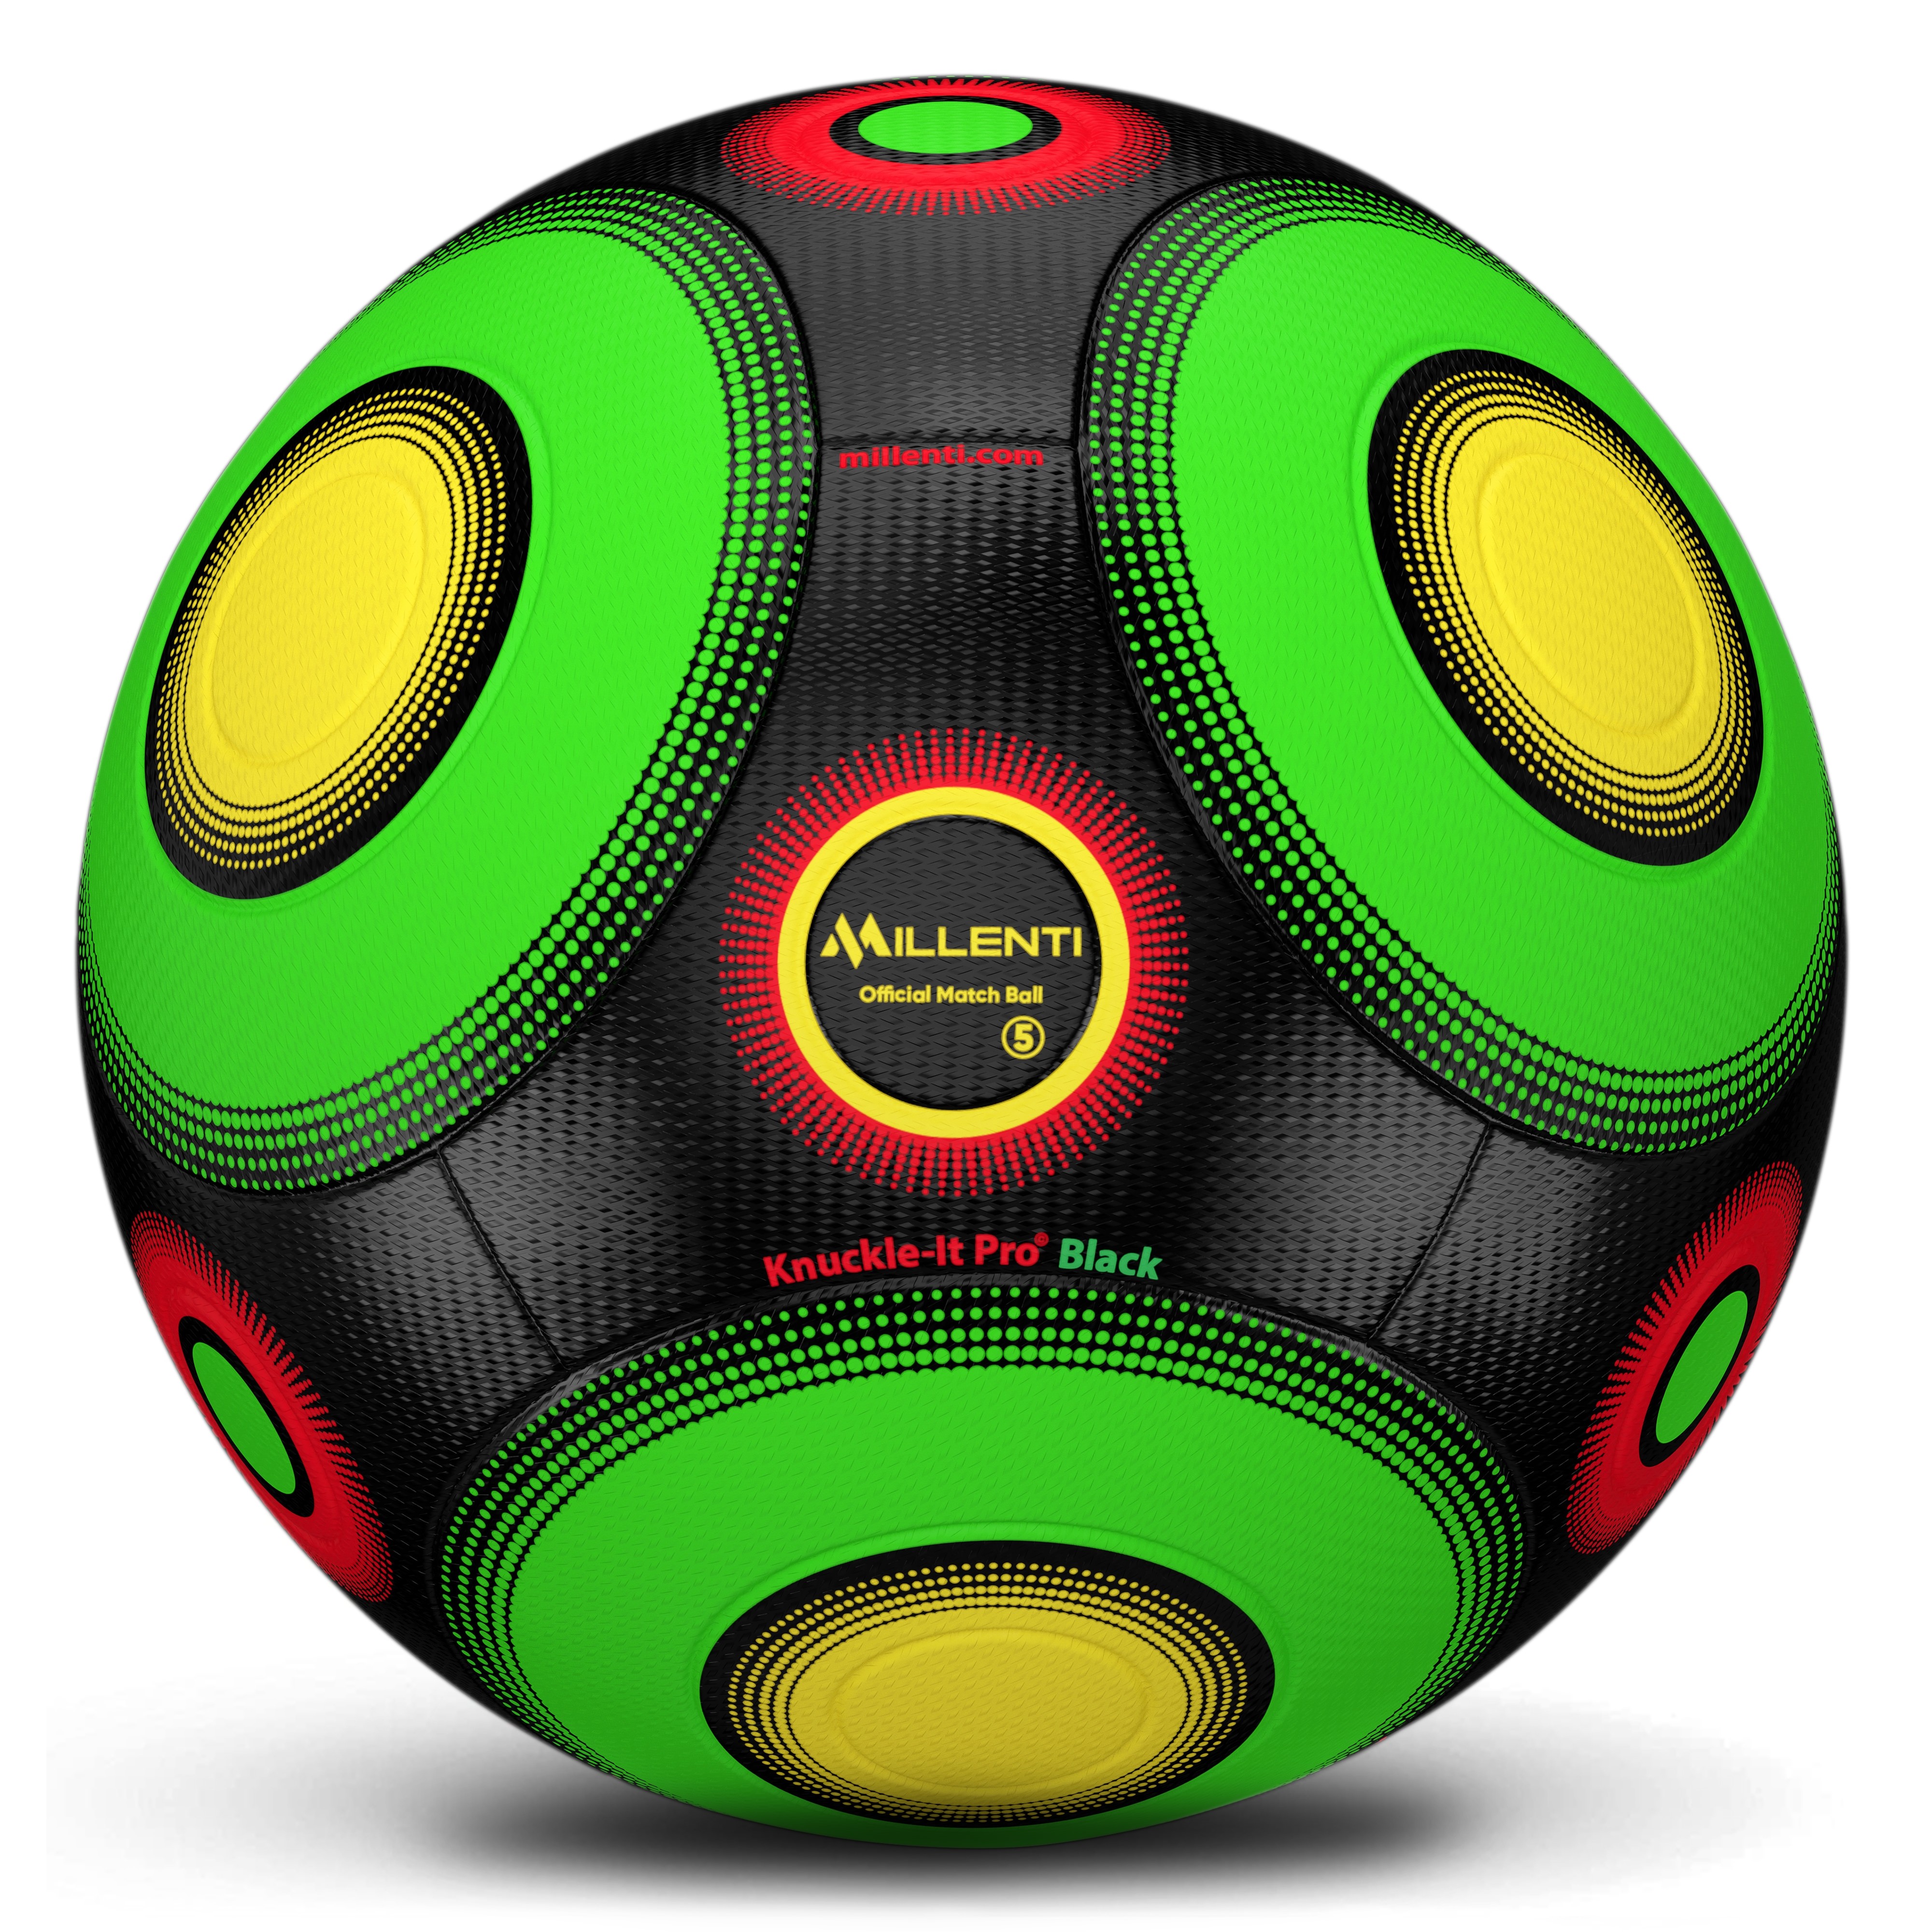 Millenti Soccer Ball Size 5 - Knuckle-It Pro Black Soccer Ball with High-Visibility Easy-to-Track Designs Thermal Fused Match Soccer Balls SB-KIP-Black 